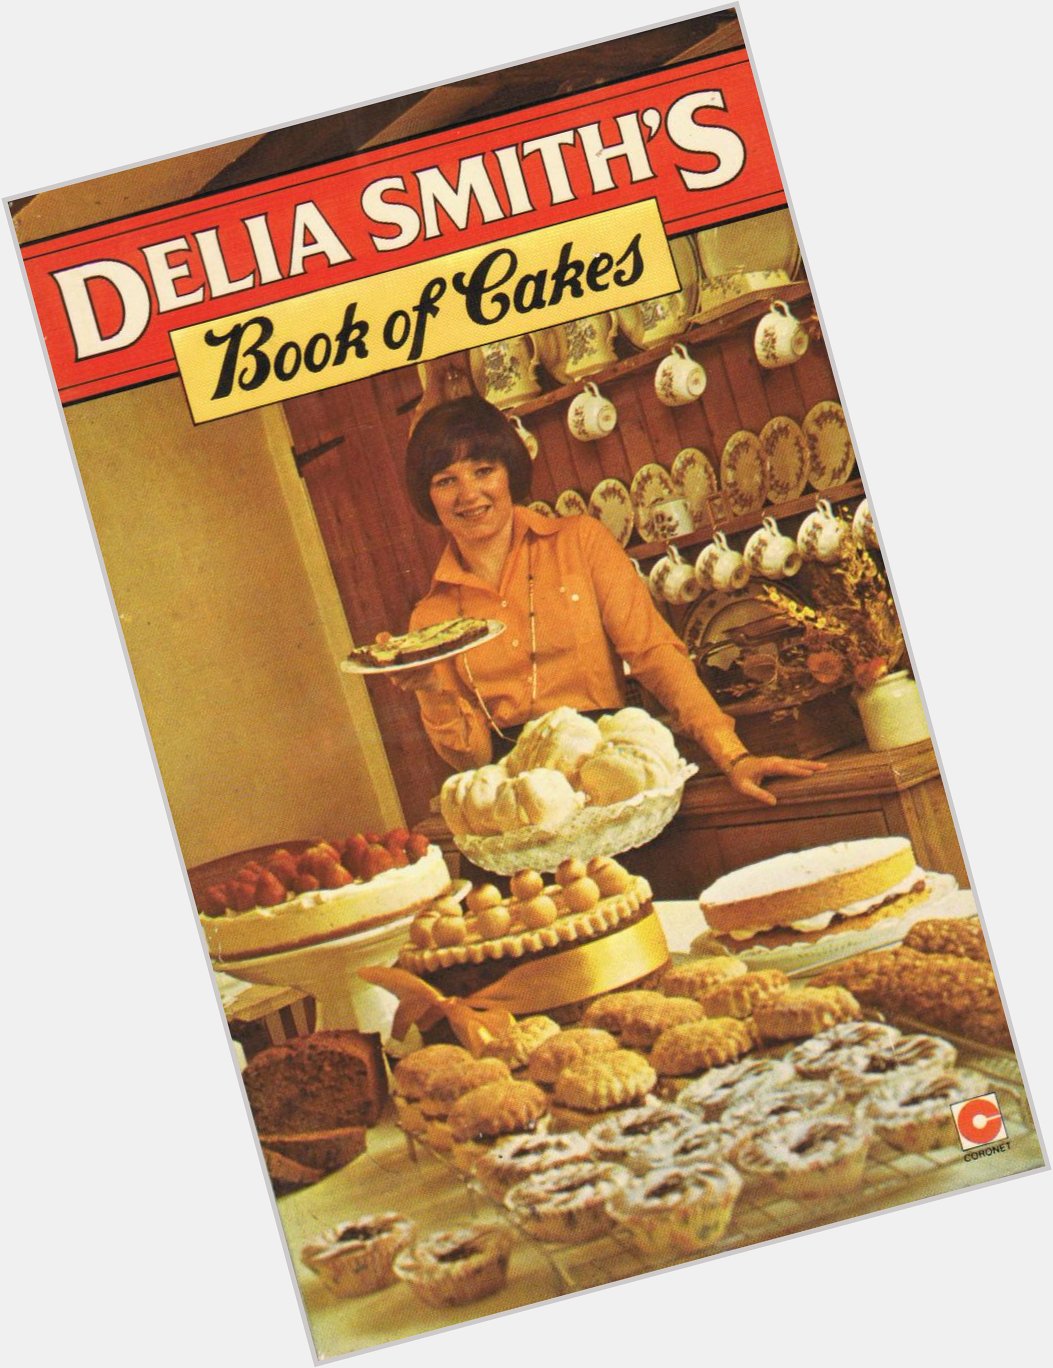 Happy Birthday to Delia Smith! If it weren t for her cookbooks, we re not sure we d be baking today    